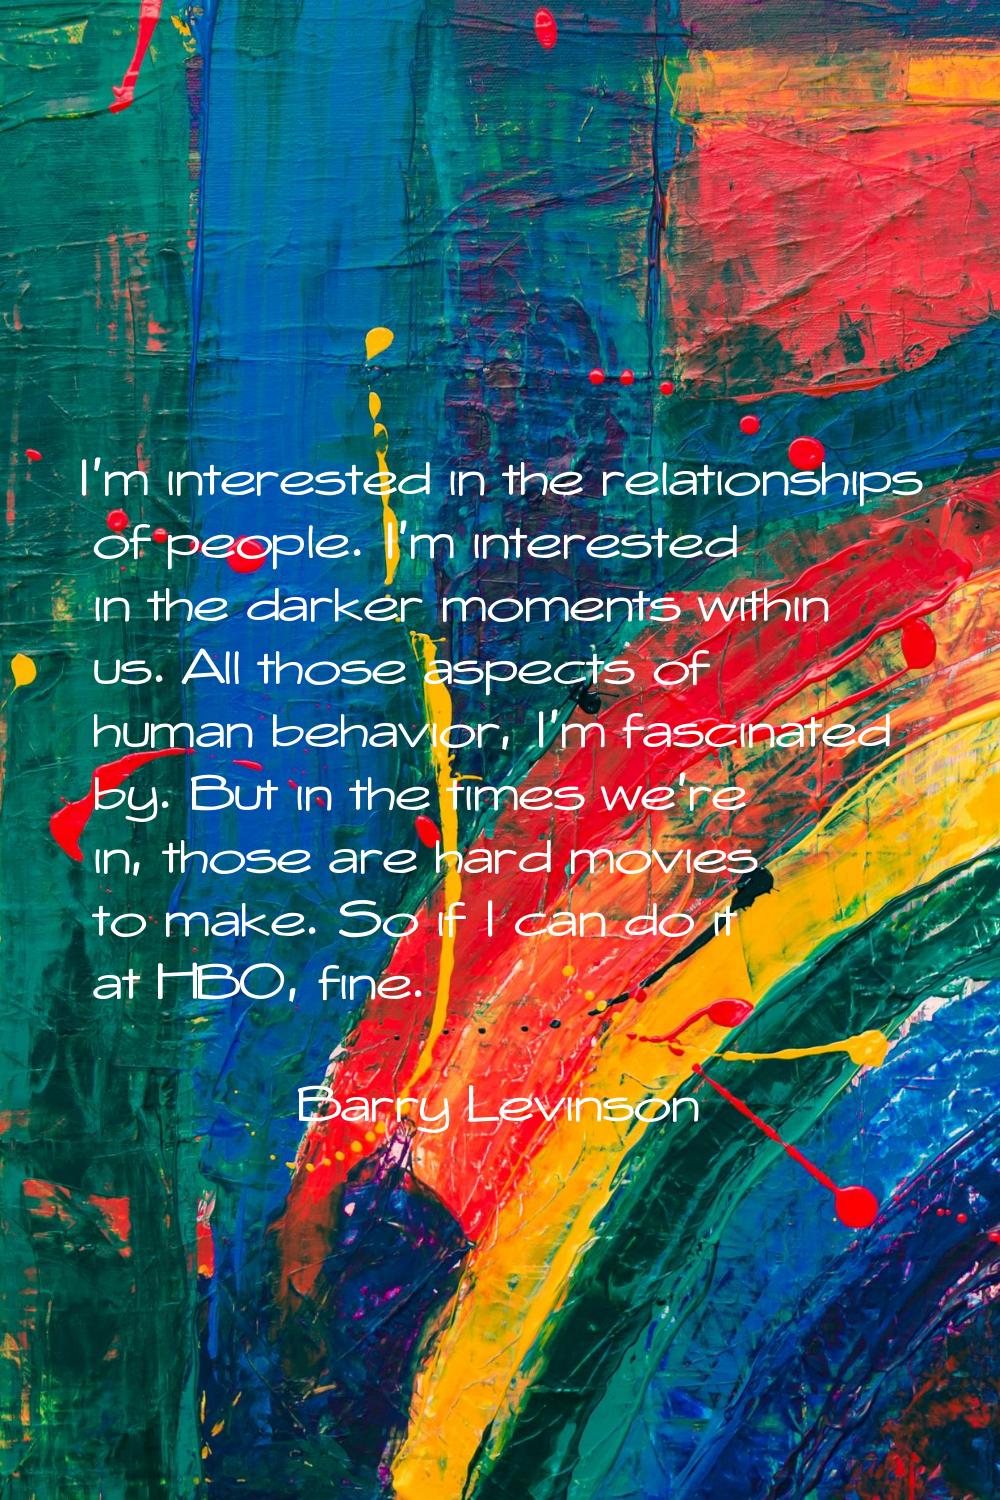 I'm interested in the relationships of people. I'm interested in the darker moments within us. All 